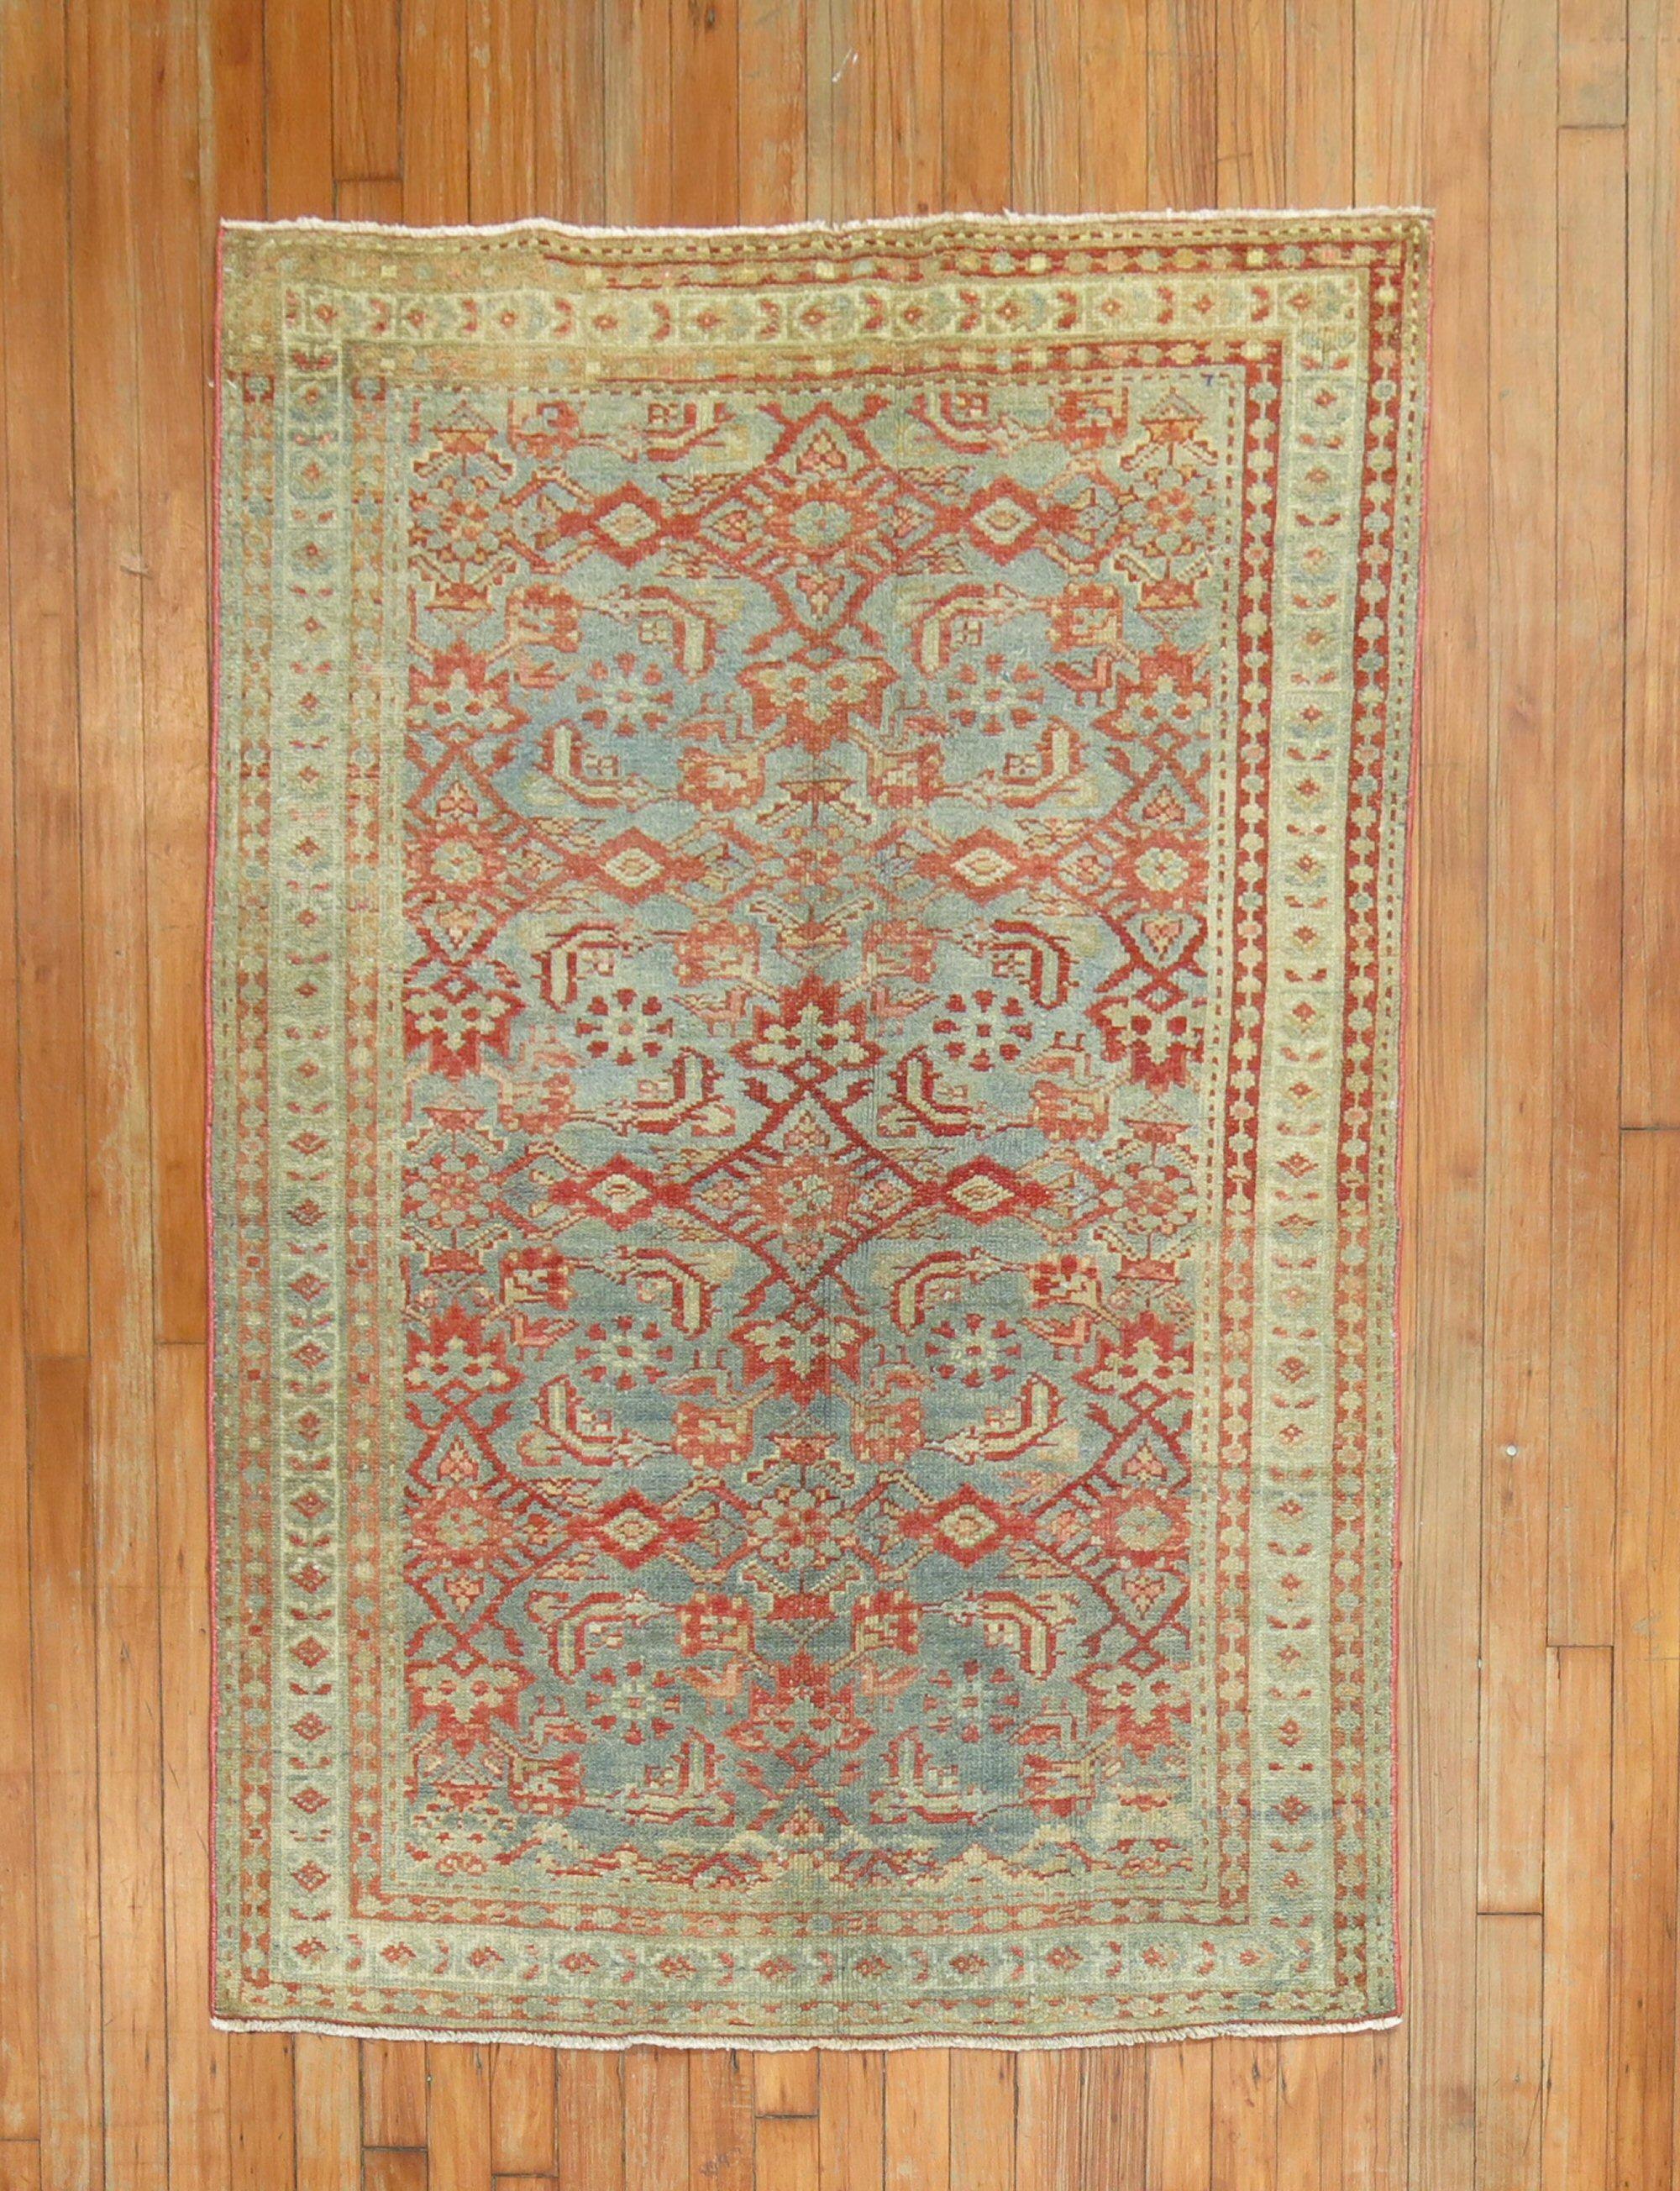 A small size early 20th century Persian Malayer rug in powder blue, ivory, and turquoise 

Measures: 3'5